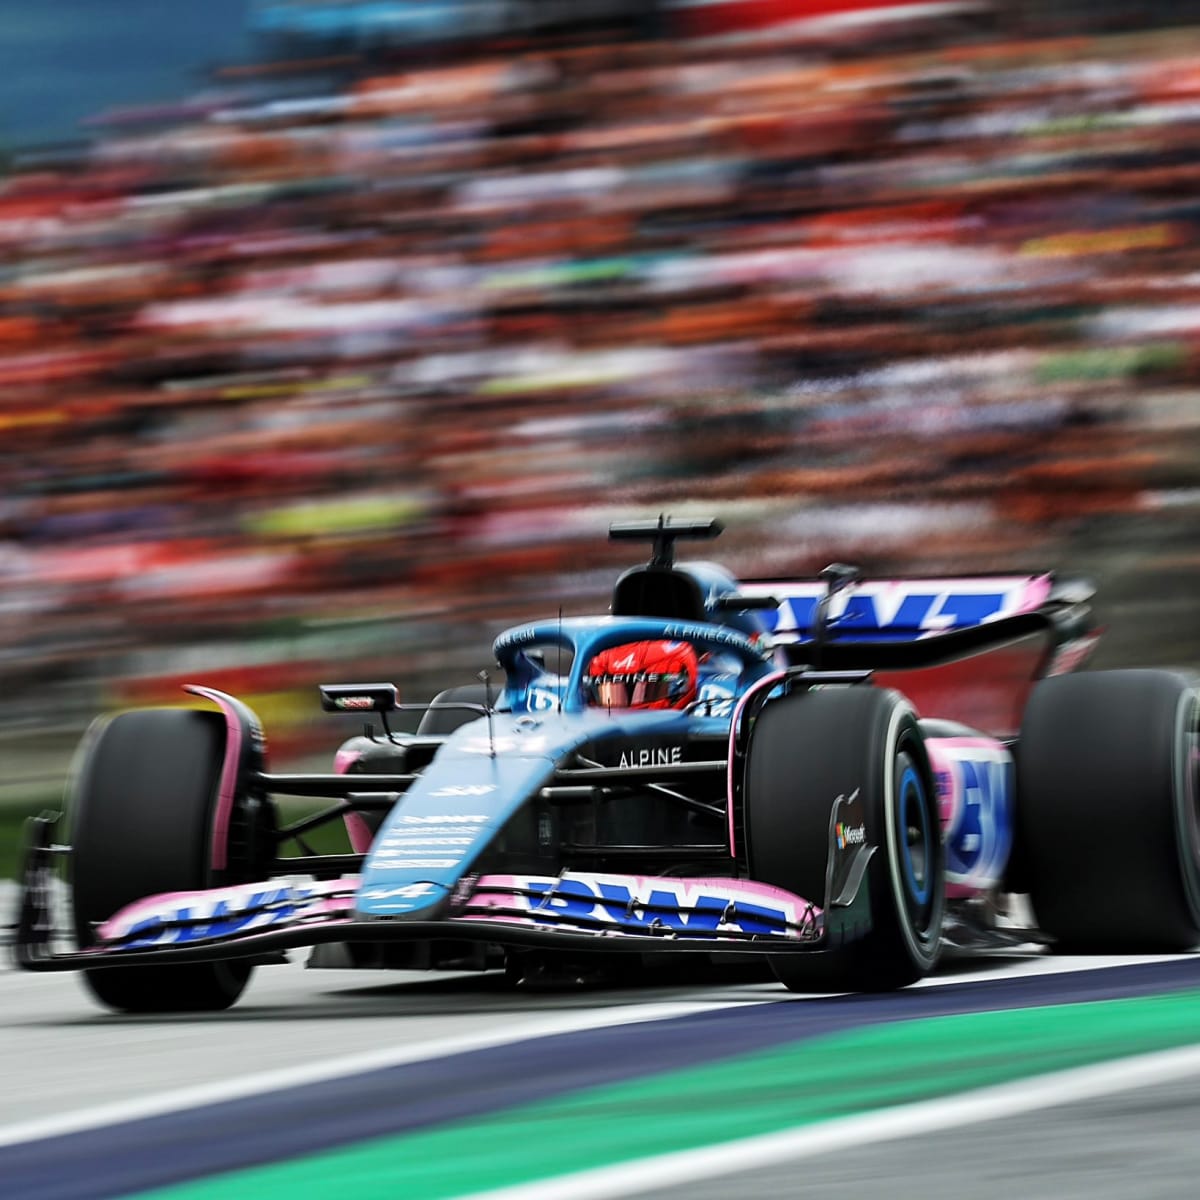 Does Alpine still have a future in Formula 1?